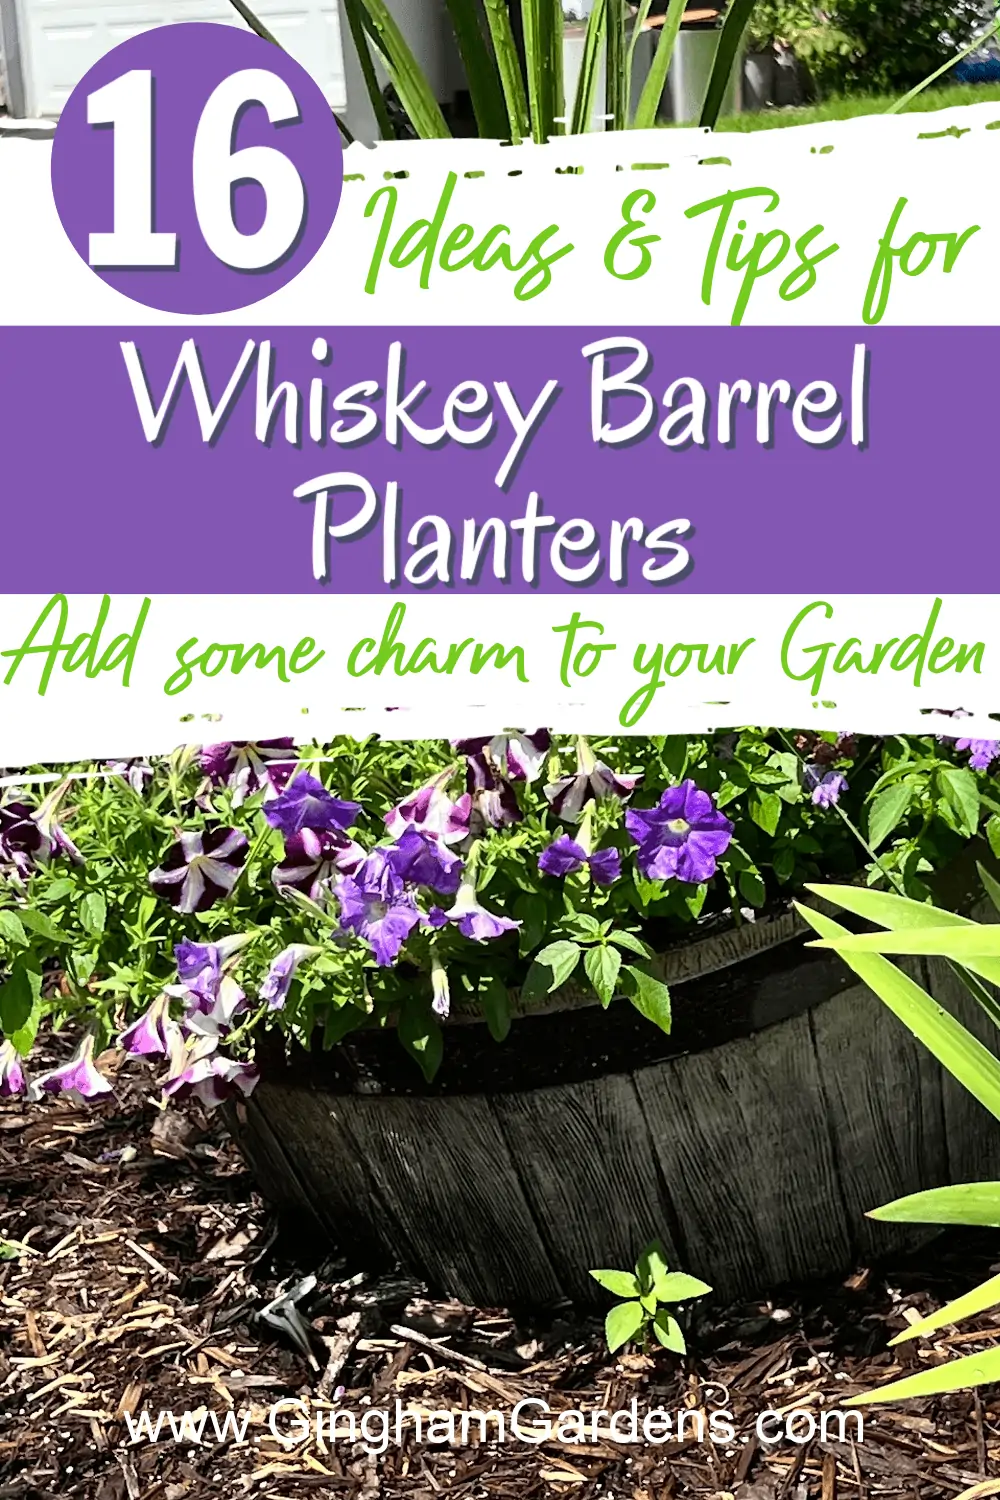 Image of a Whiskey Barrel Planter with text overlay - 16 ideas and tips for Whiskey Barrel Planters